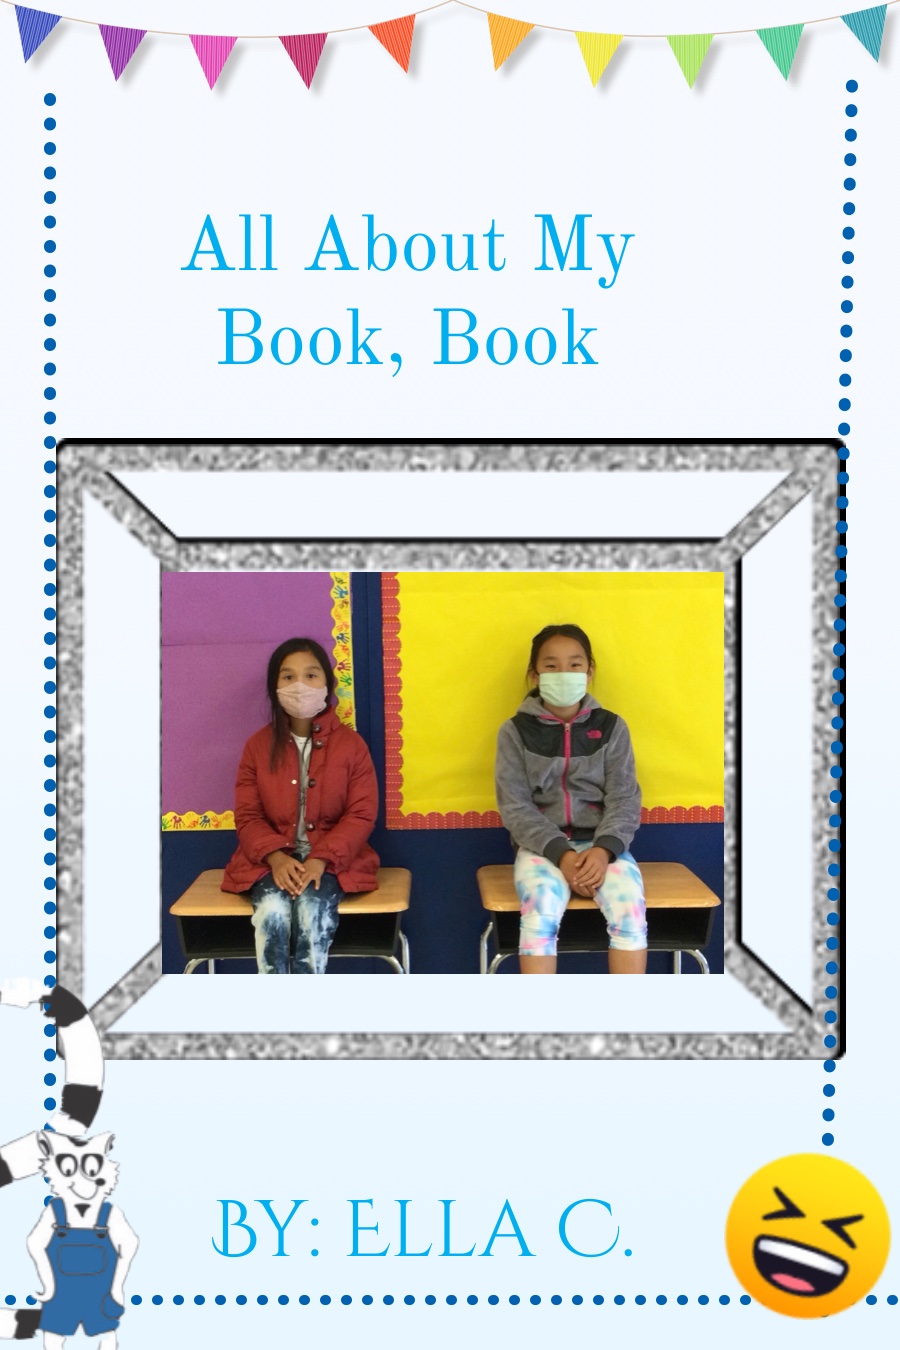 All About My Book by Ella C